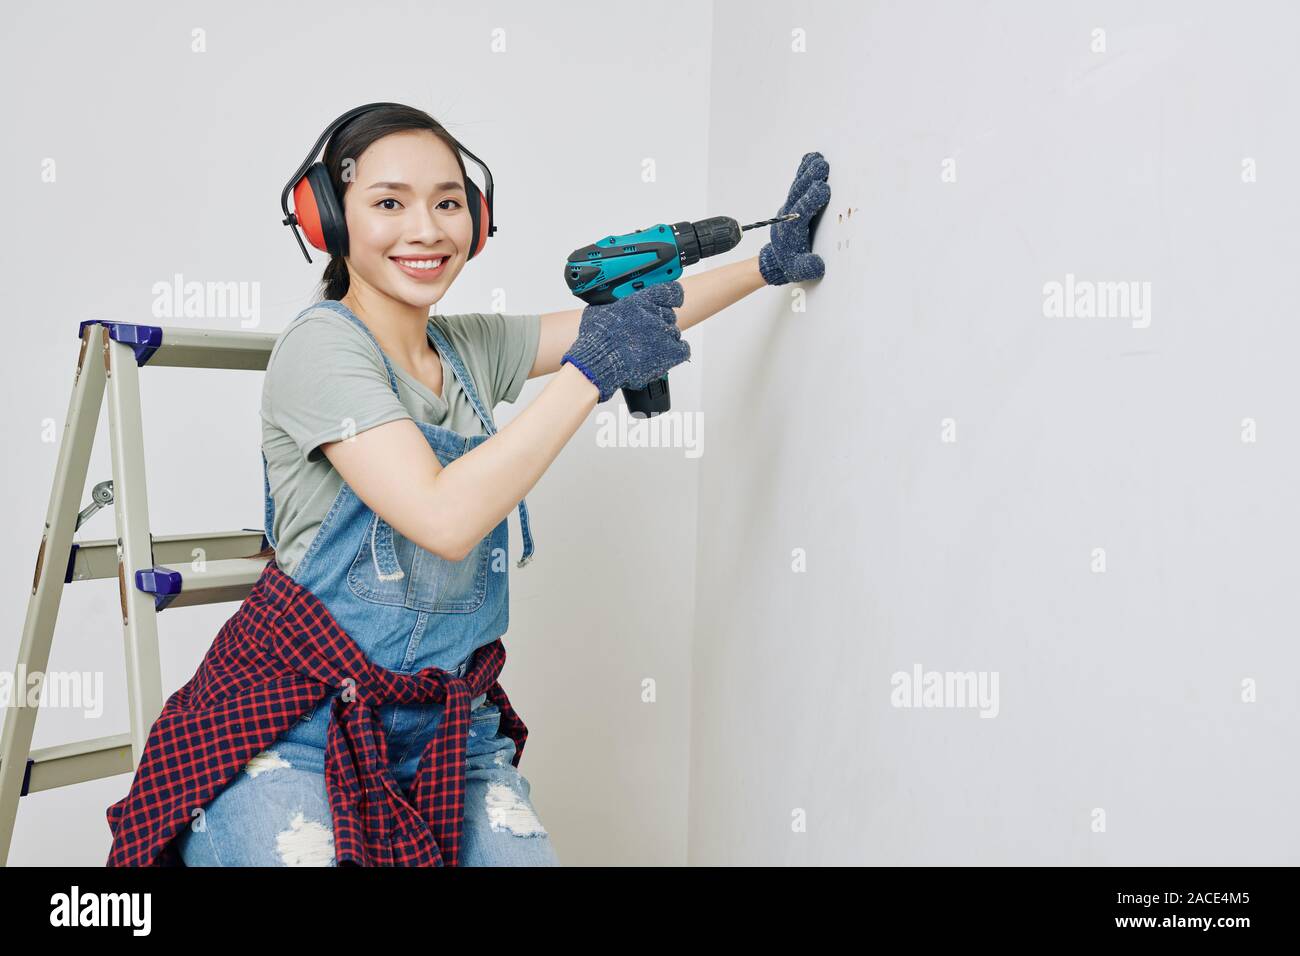 Portrait of pretty smiling young Asian woman wearing protective ear muffs when using electric drill Stock Photo